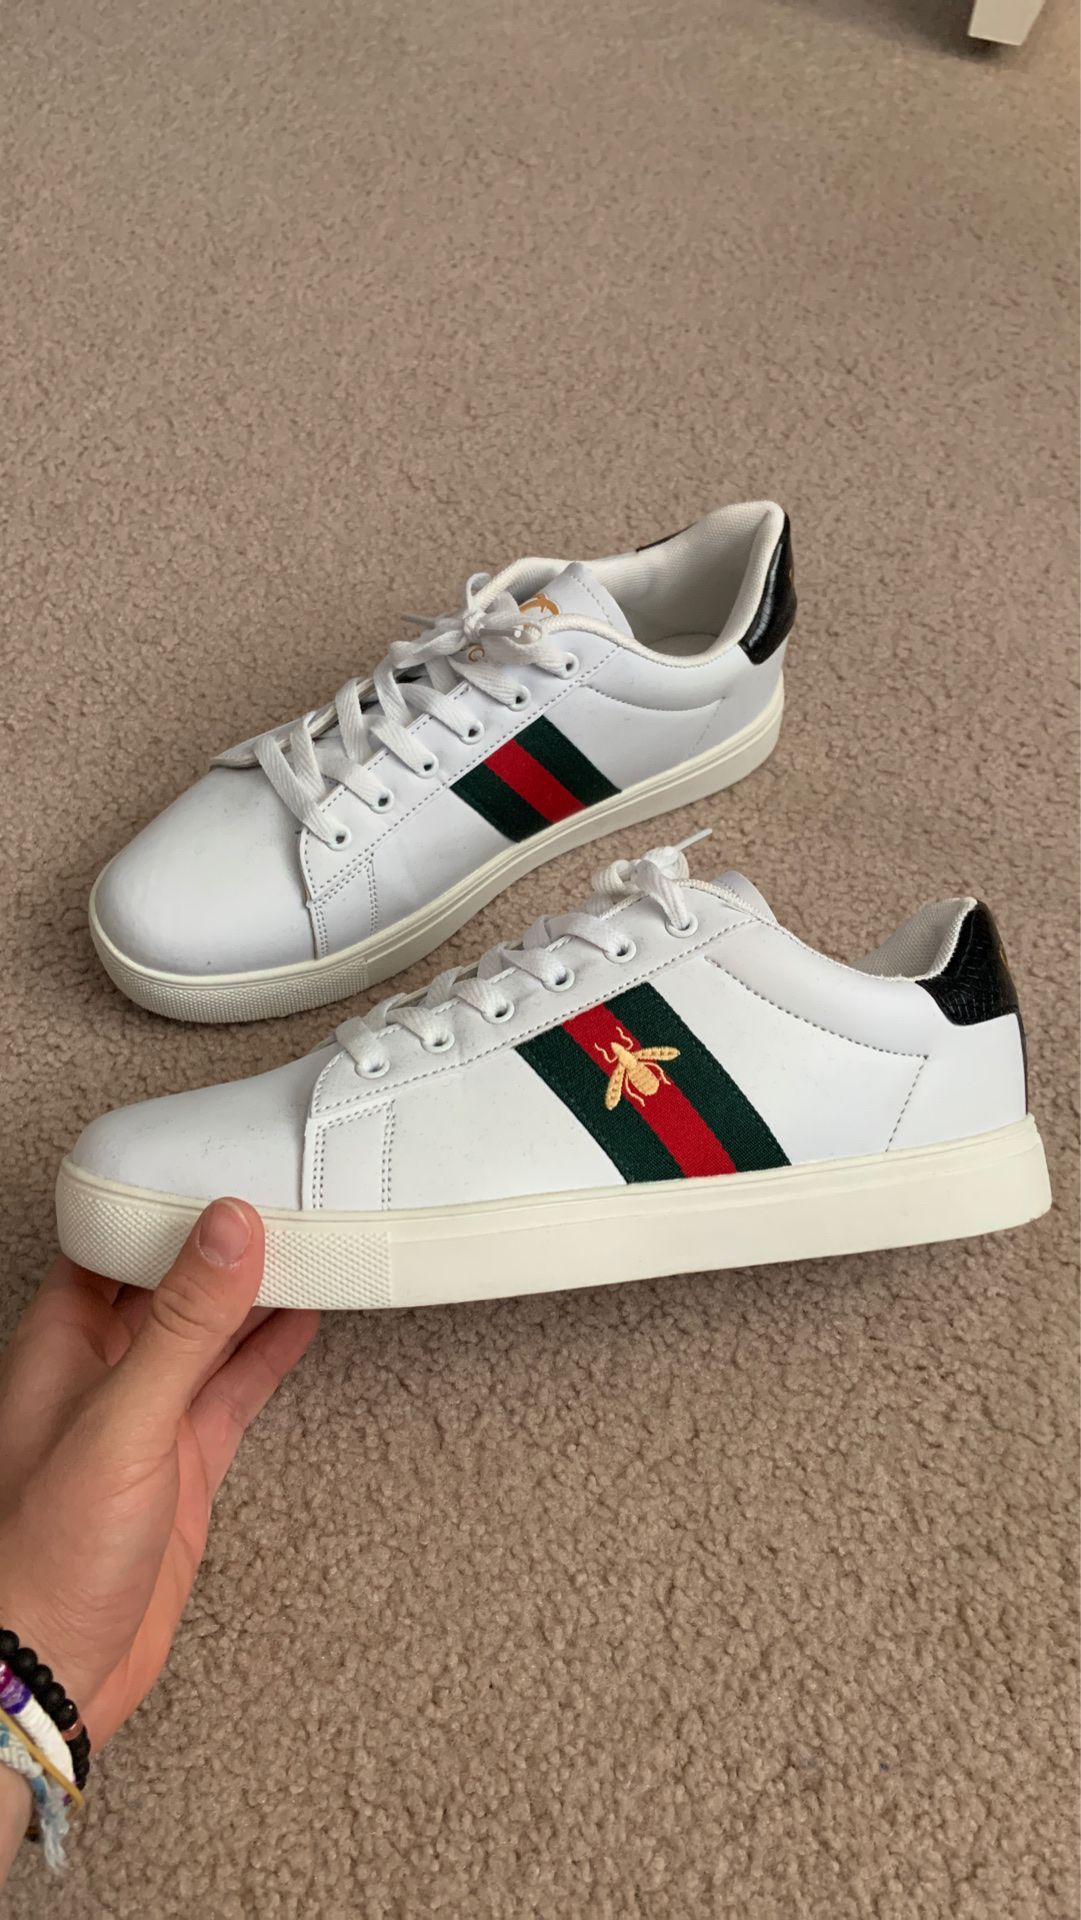 Gucci Ace Sneaker ONLY WORN 2x